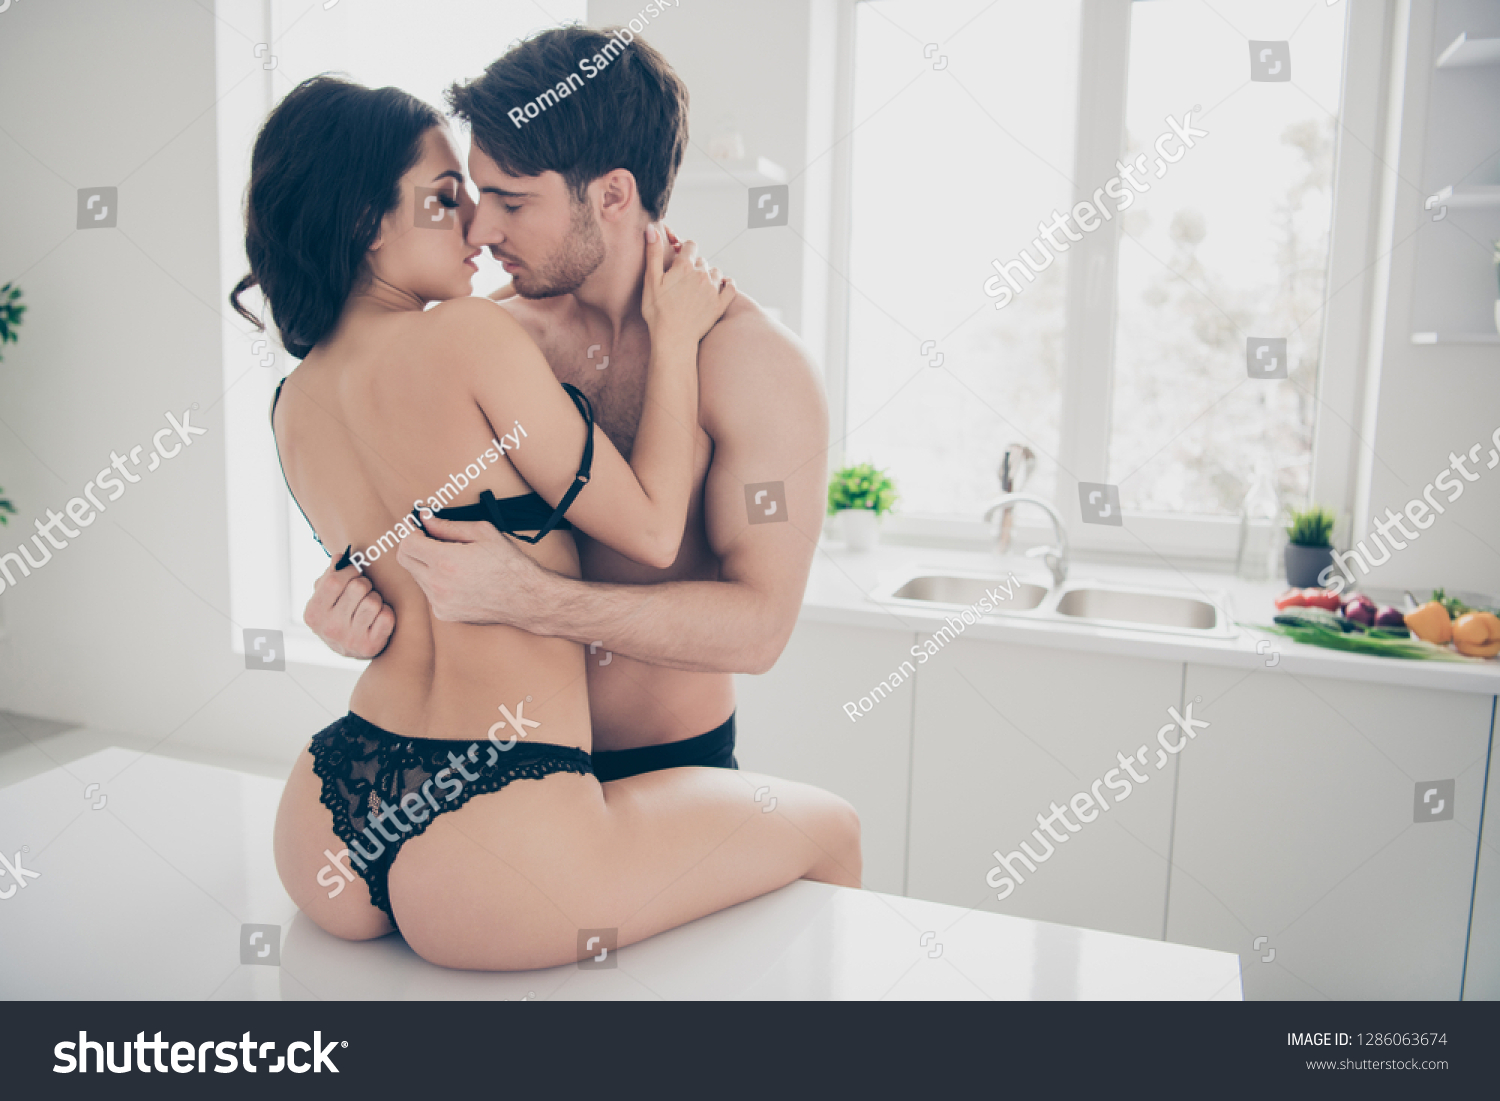 Attractive Couple Makes Love On Chair Stock Photo 1140637610 Shutterstock image